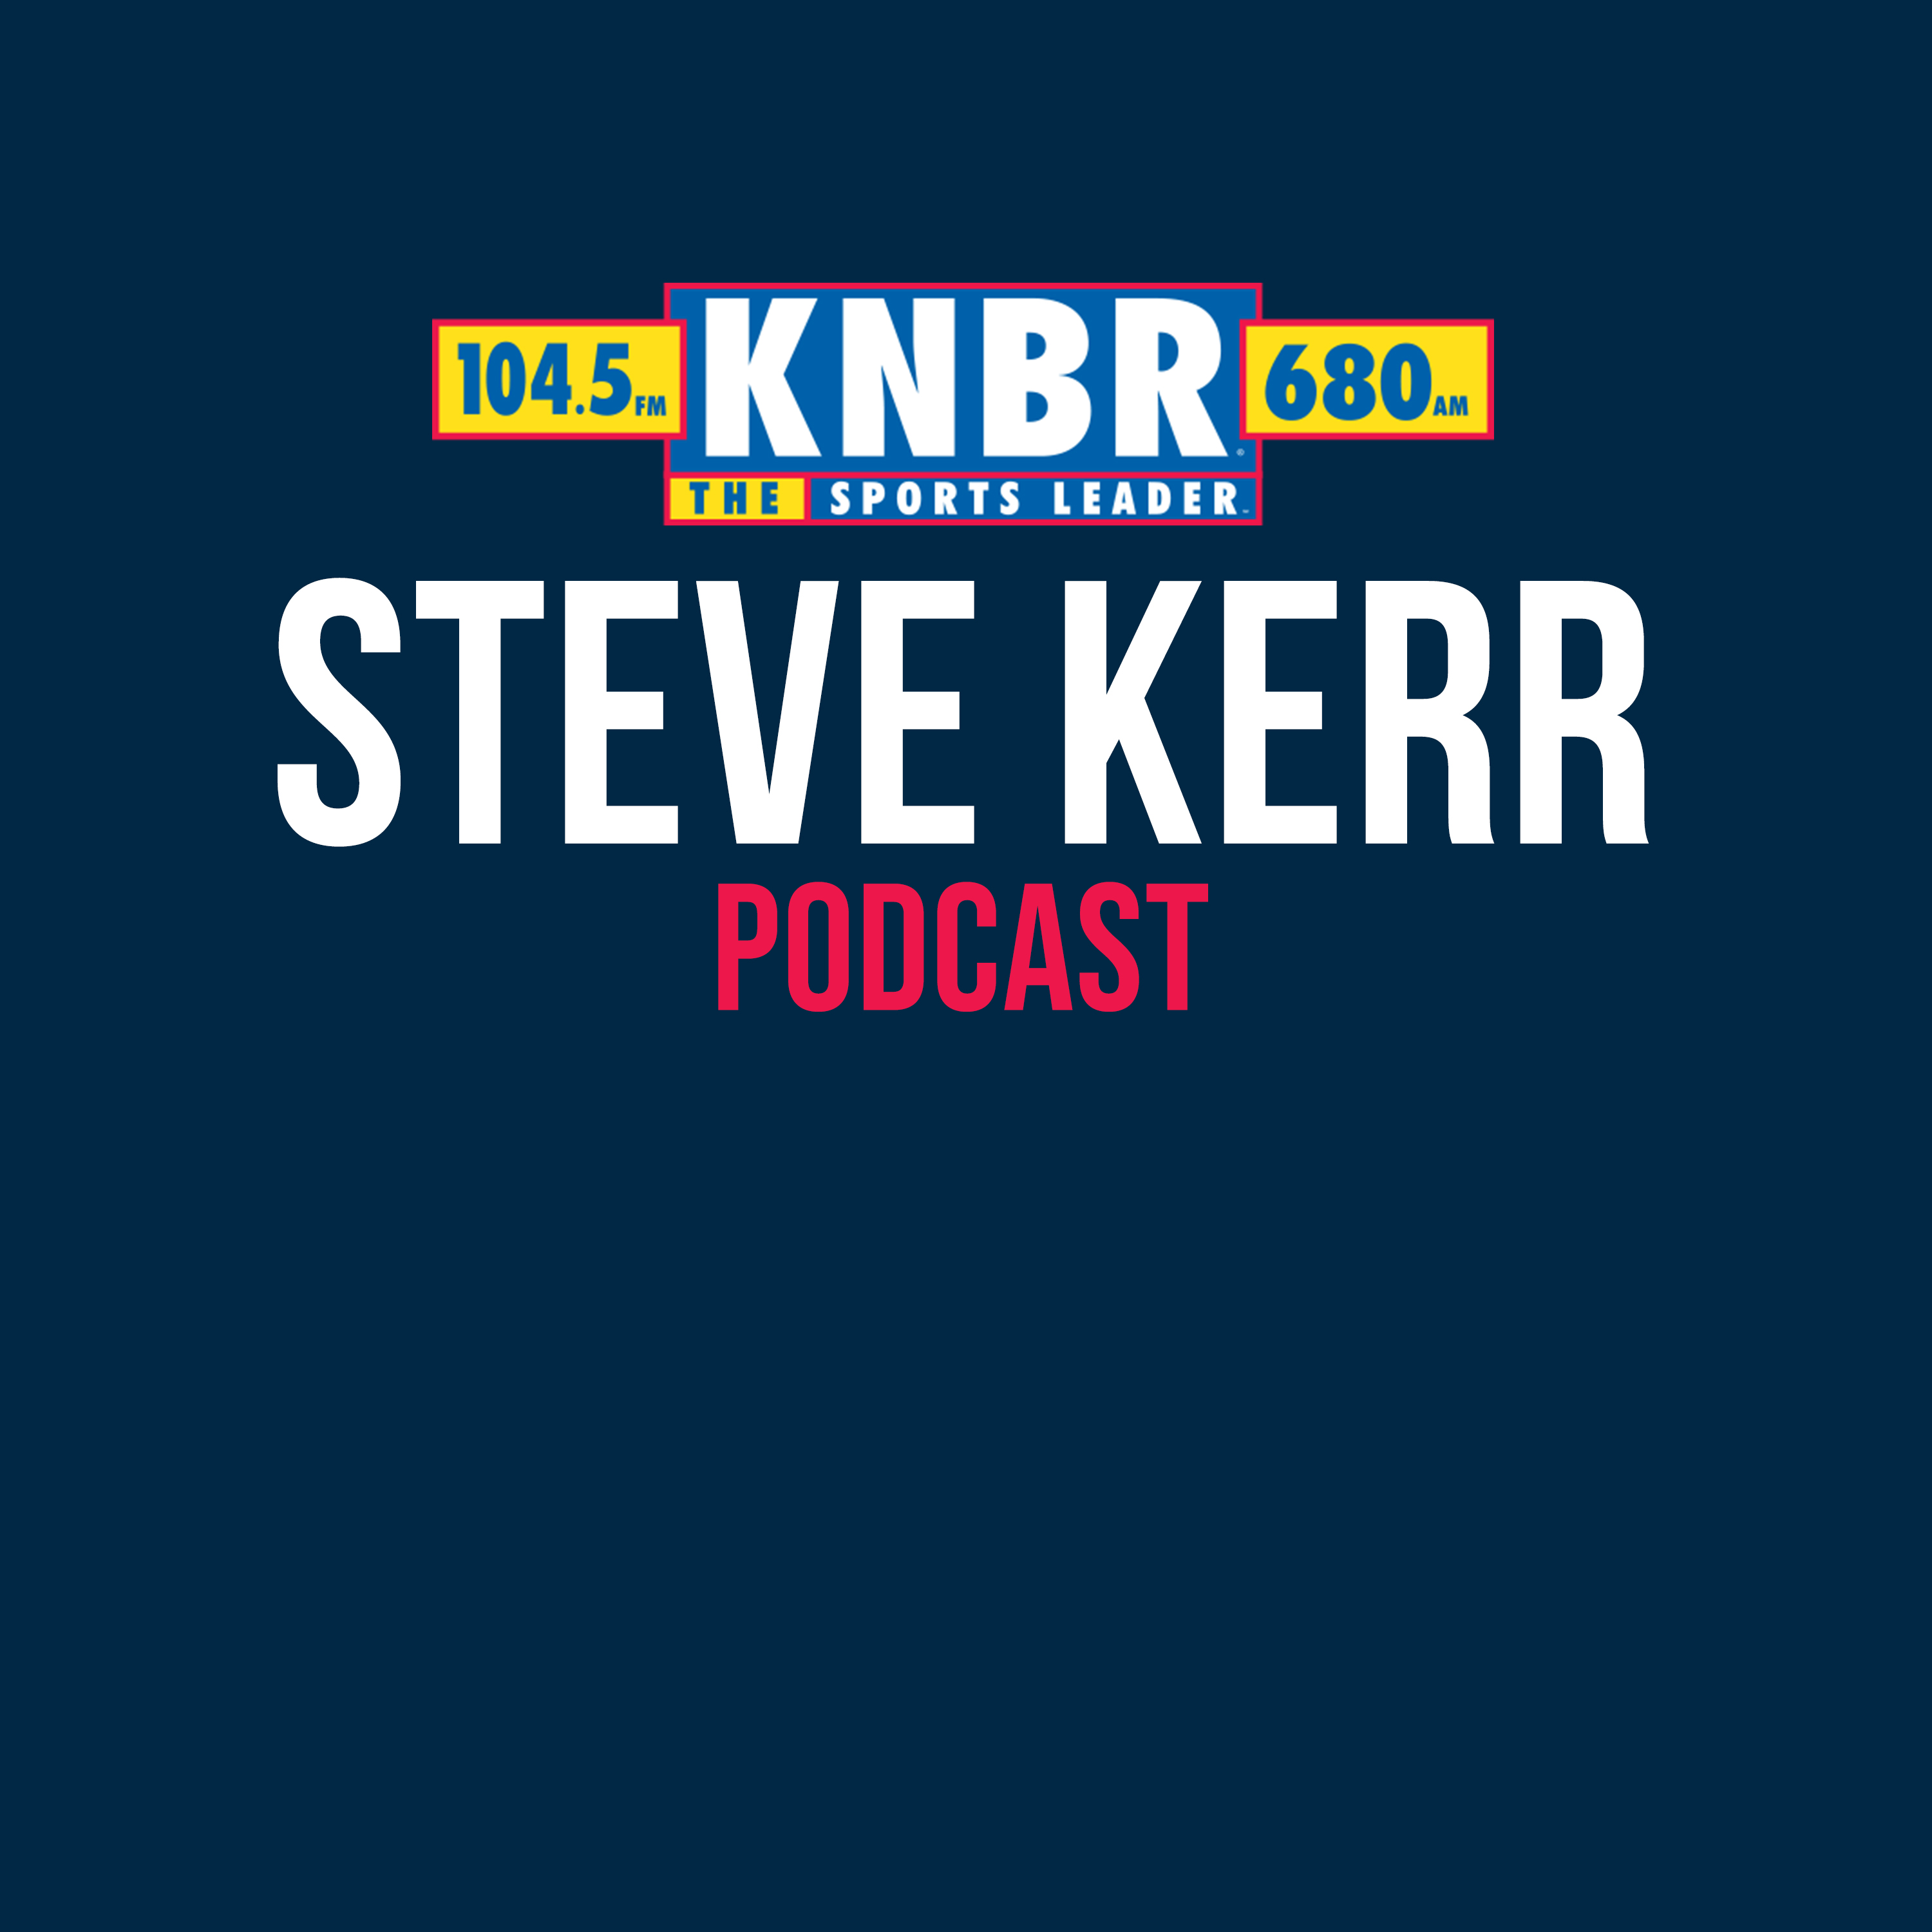 4-11 Steve Kerr joins Tom Tolbert to discuss the Warriors big win over the Lakers